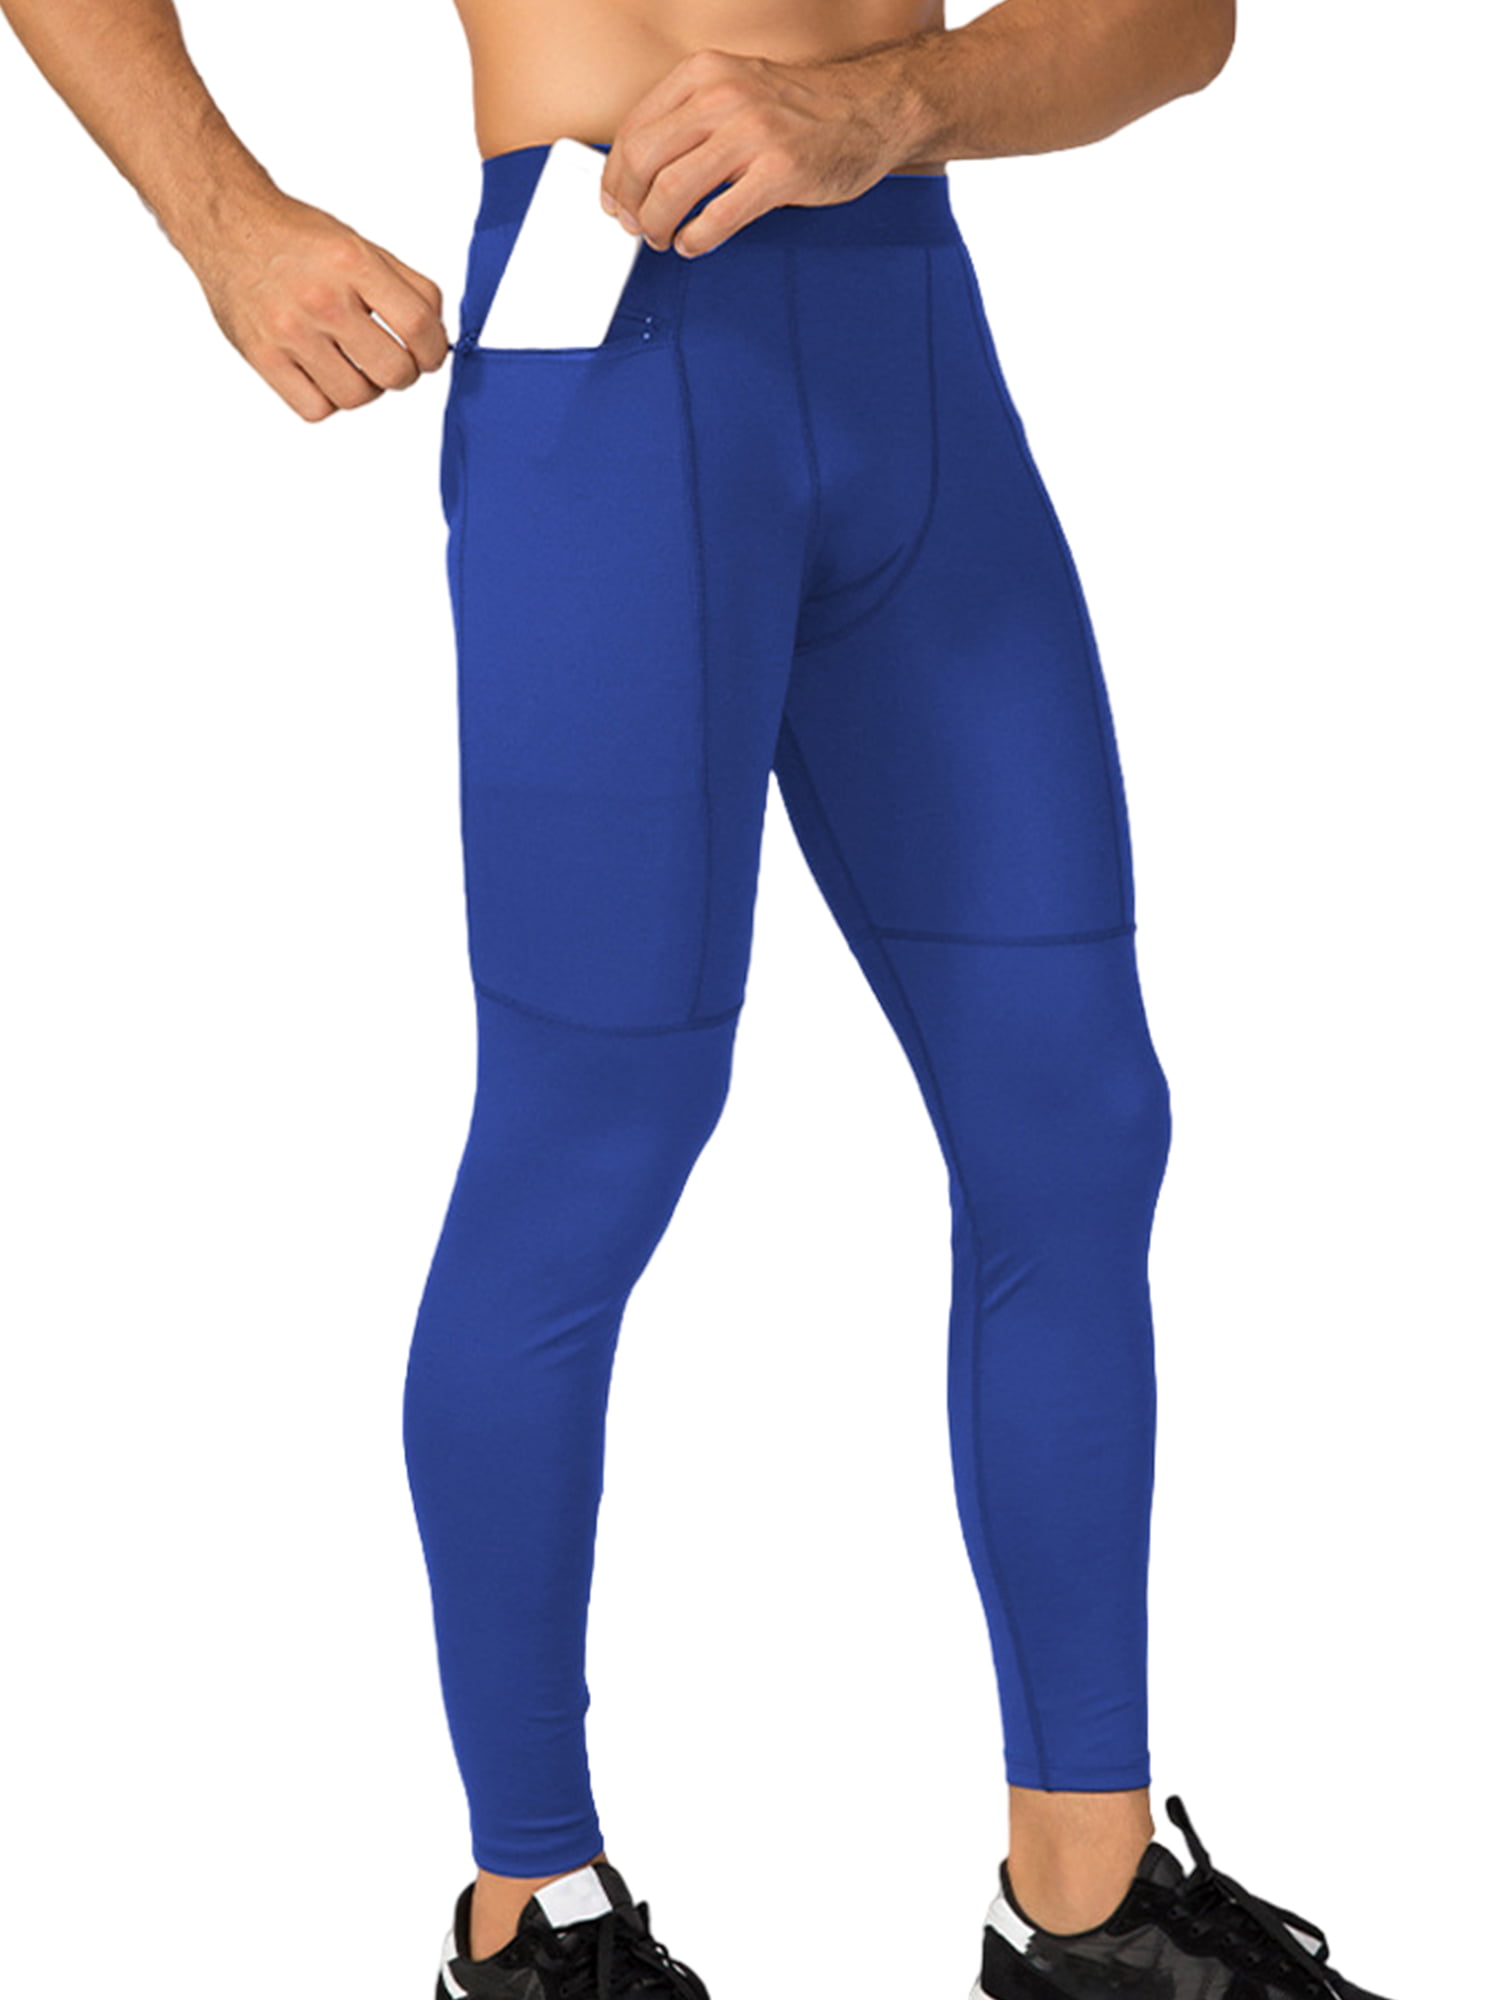 Glonme Men Leggings High Waisted Tights Cool Dry Compression Pants